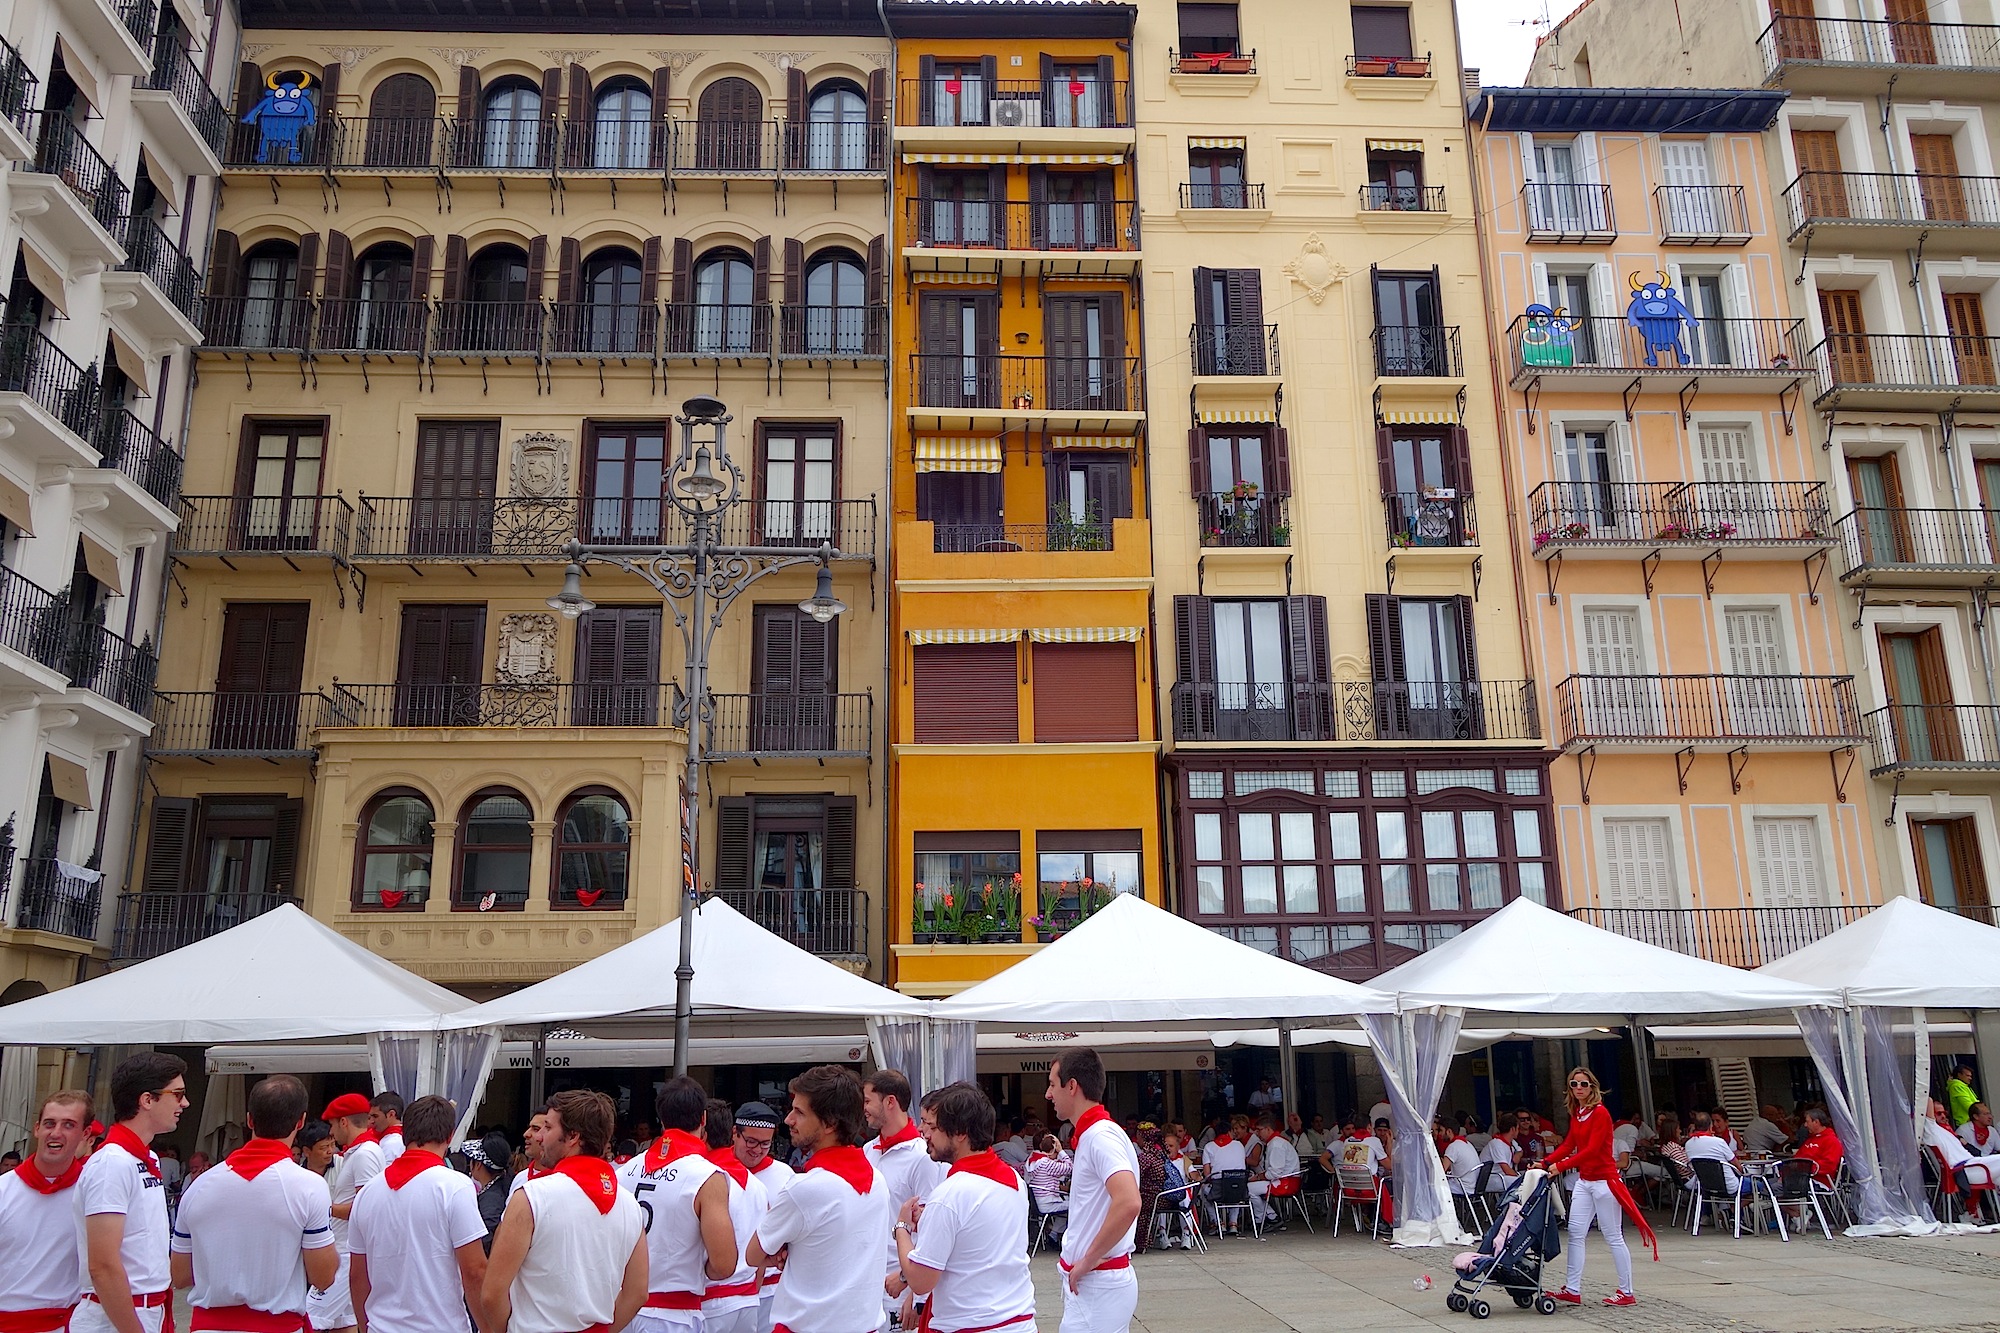 Running with the Bulls 2014